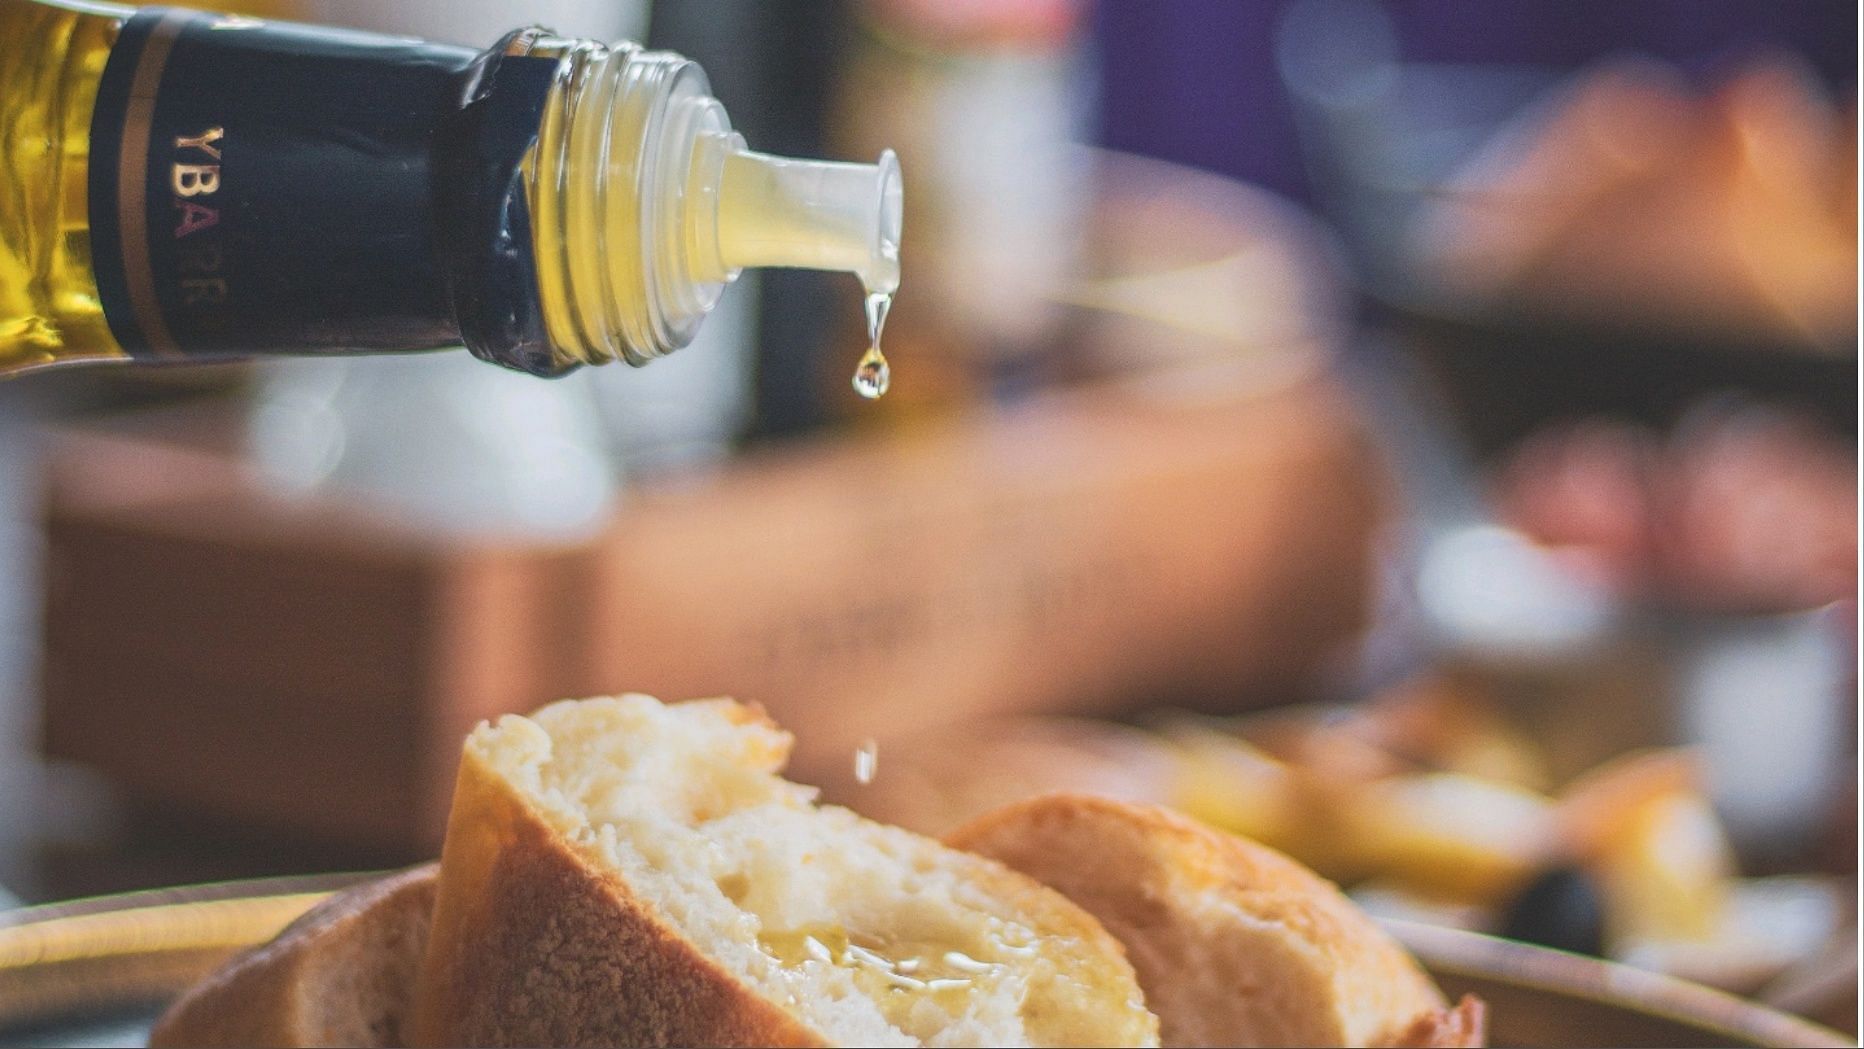 Adding MCT oil to your meals will help boost appetite (Image via Pexels)